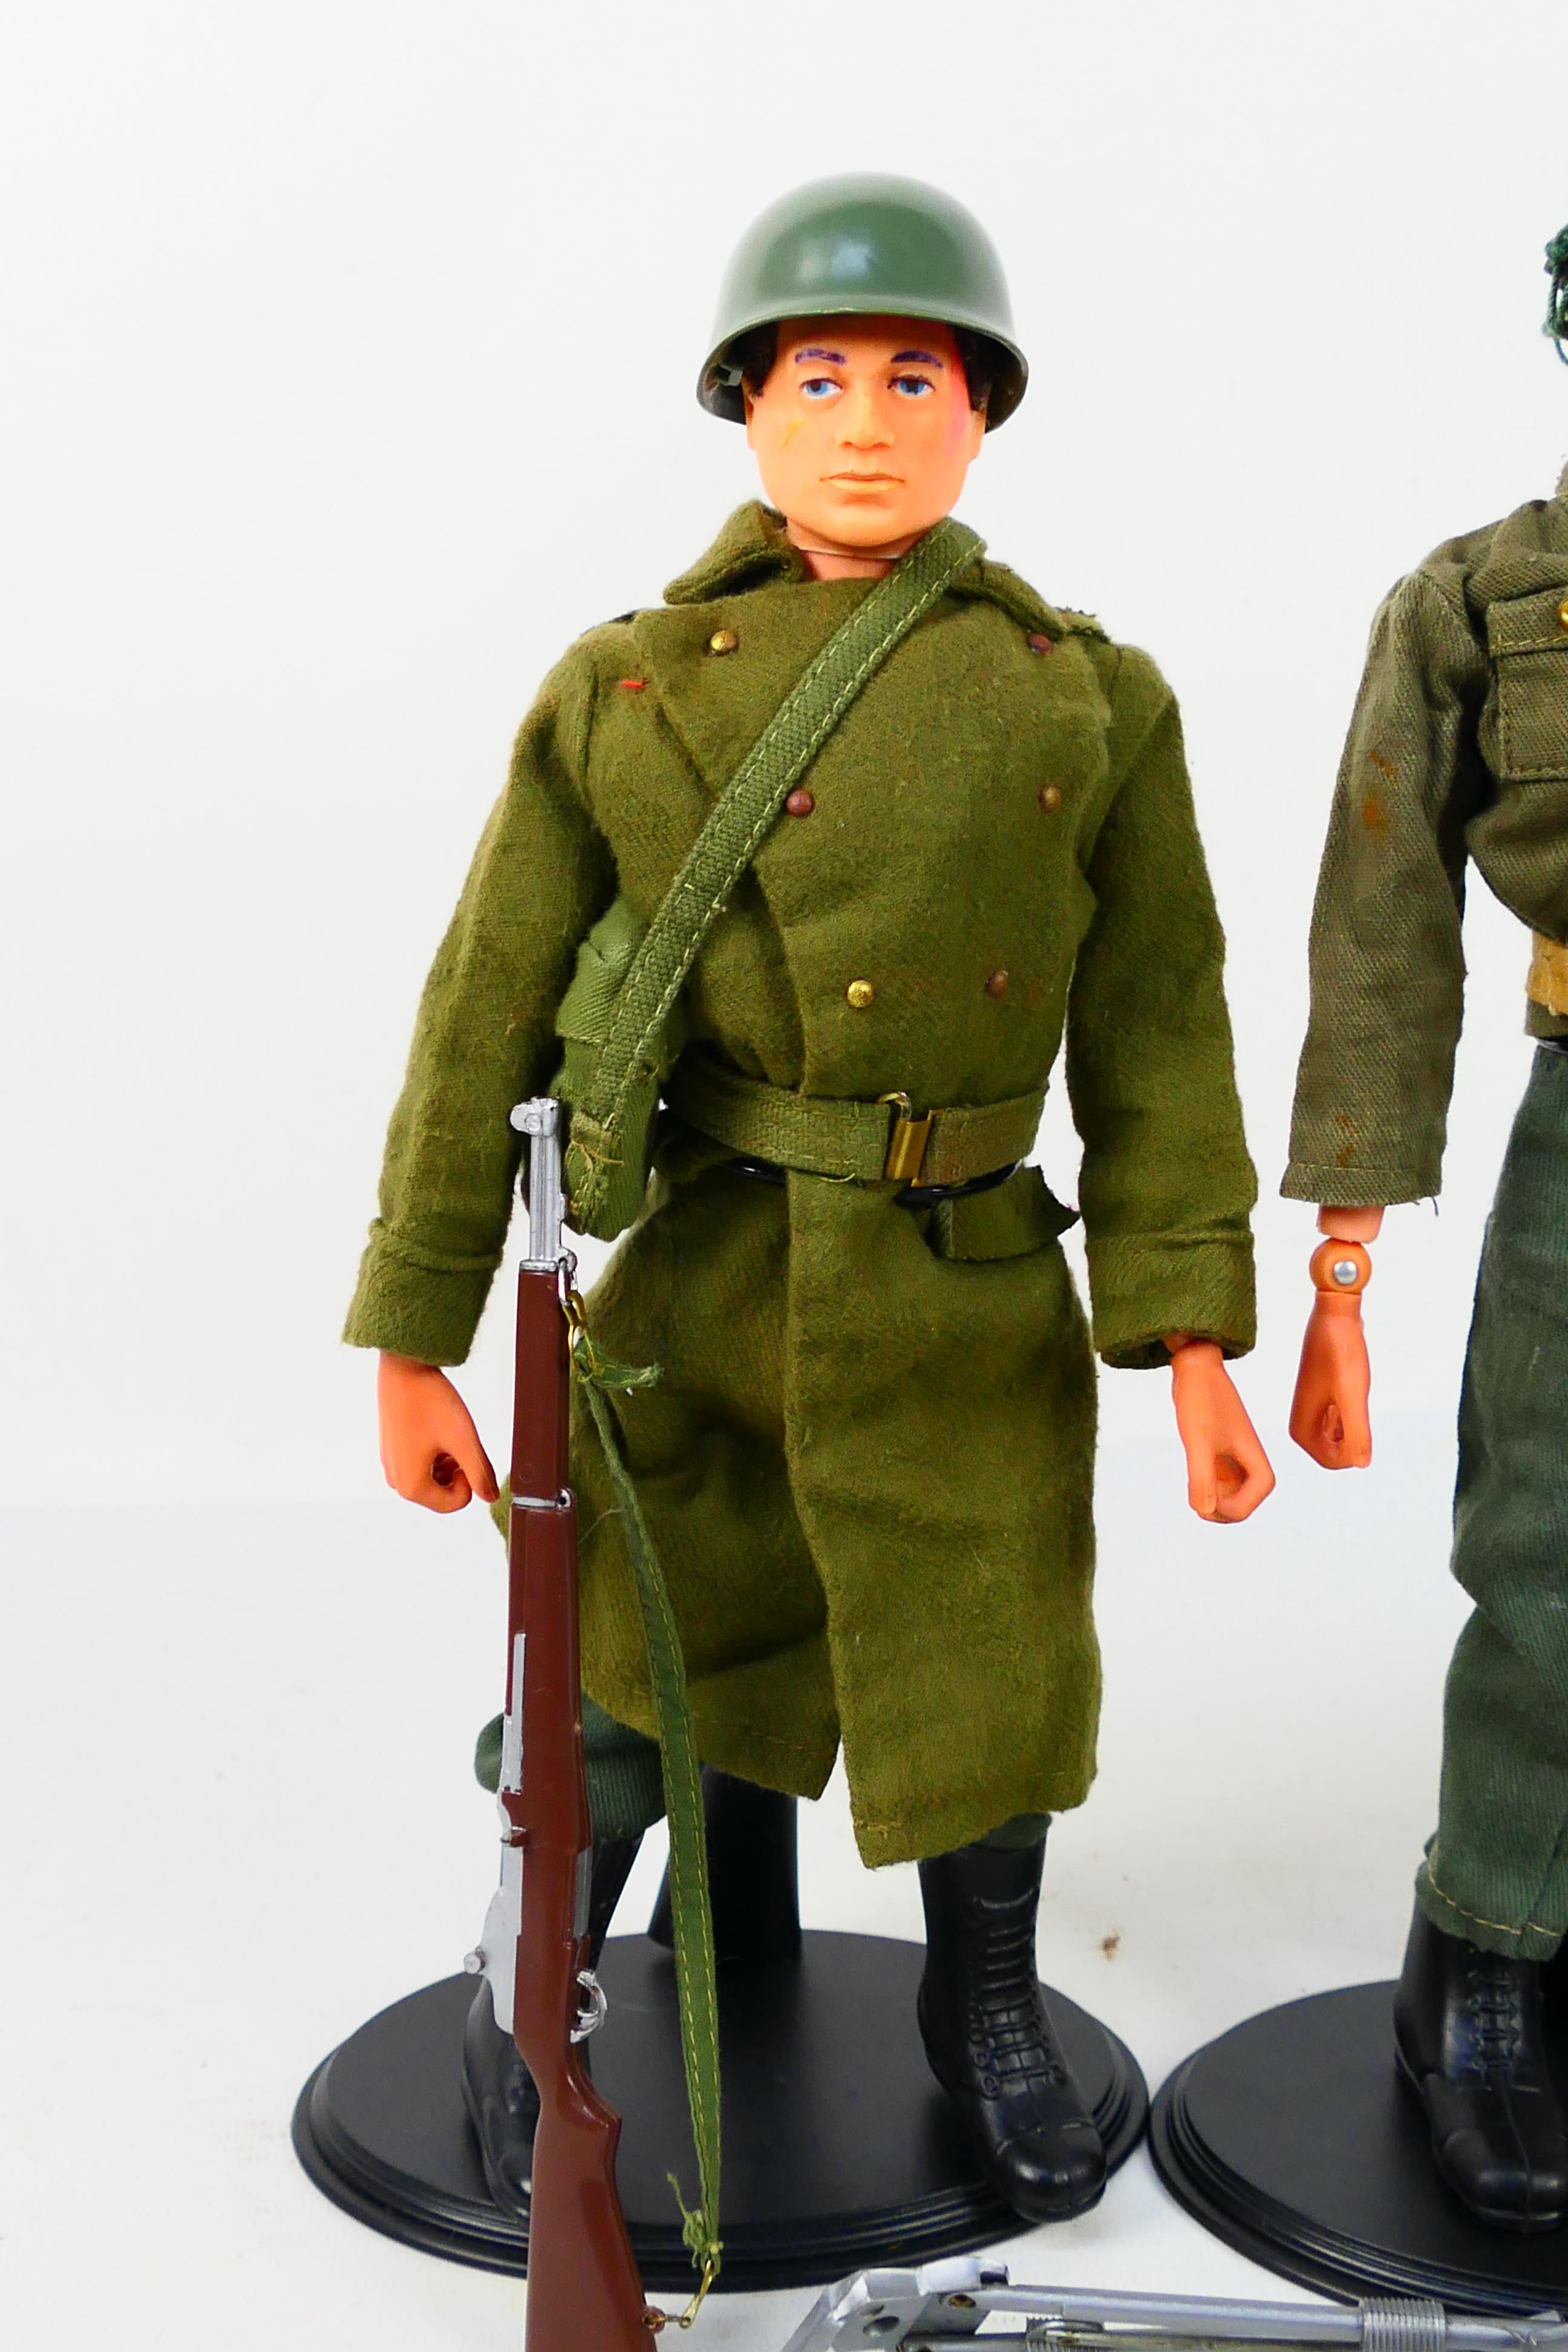 Palitoy - Action Man - 3 x vintage flock hair Action Man figures on stands. - Image 2 of 4